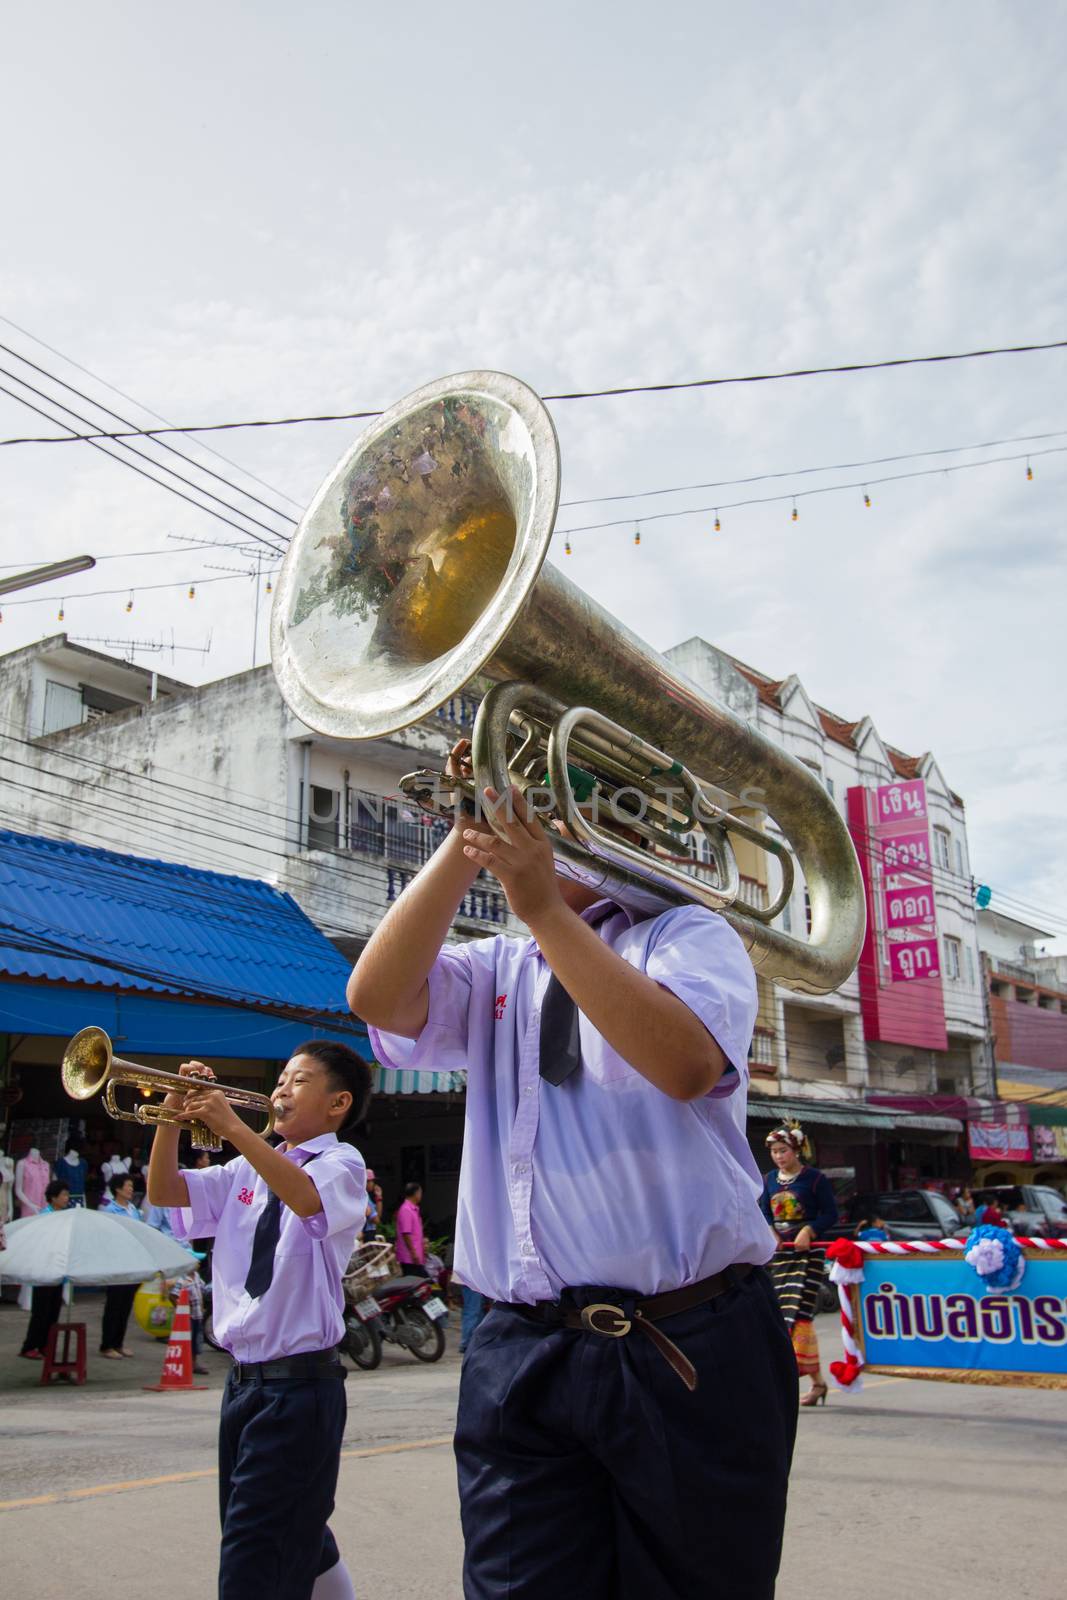 CHIANGRAI, THAILAND - AUG 12: unidentified young boy playing marching tuba on August 12, 2014 in Chiangrai, Thailand.